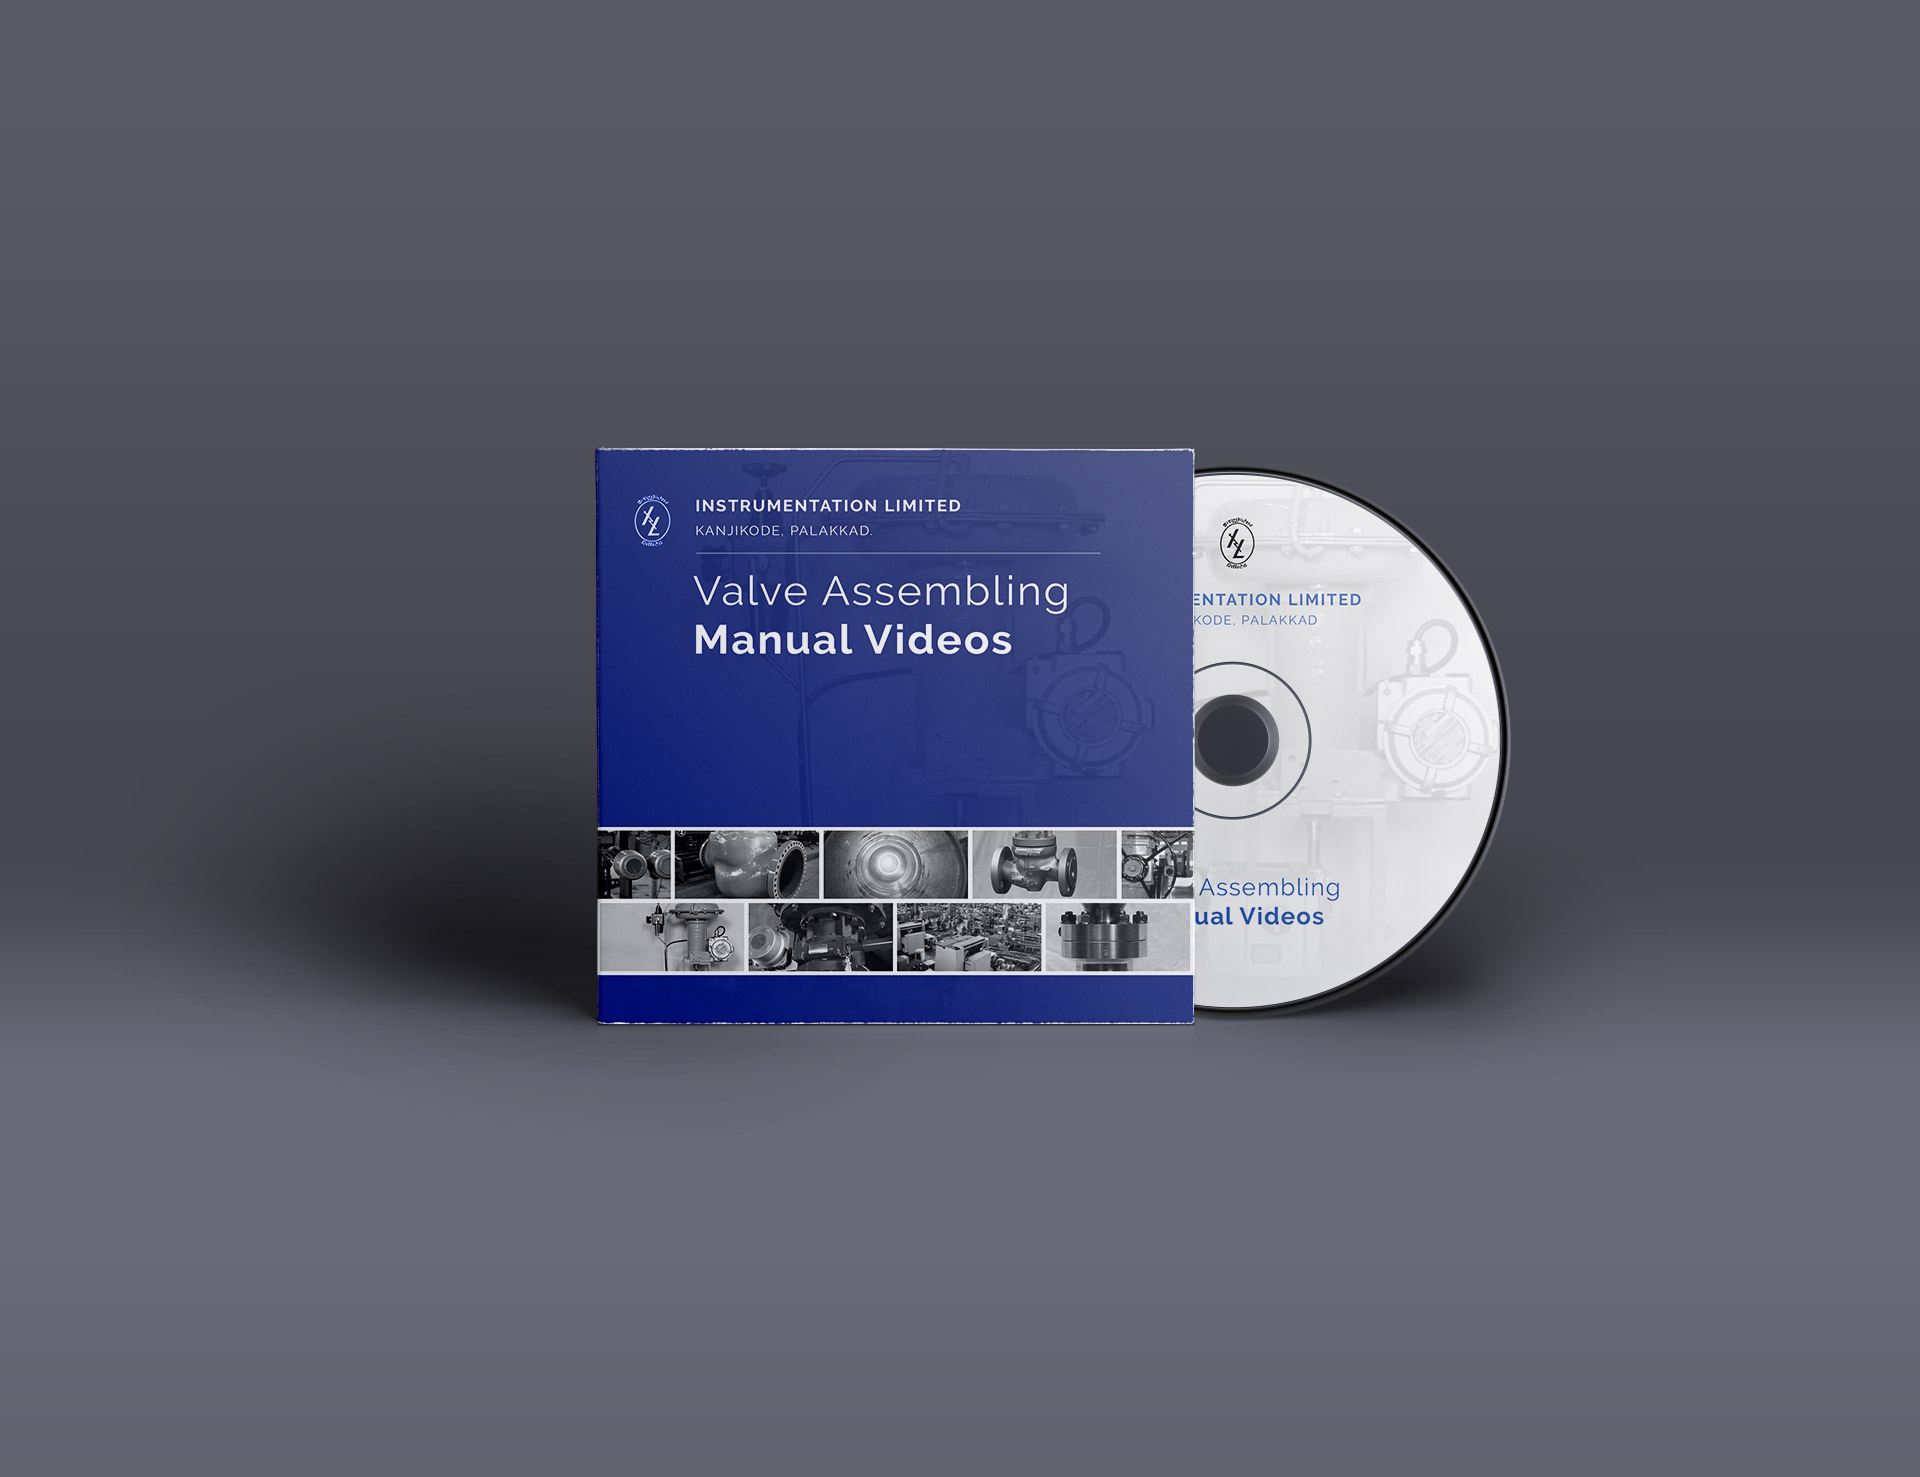 A CD and it's pouch of Instrumentation Limited (IL) Valve assembly presentation